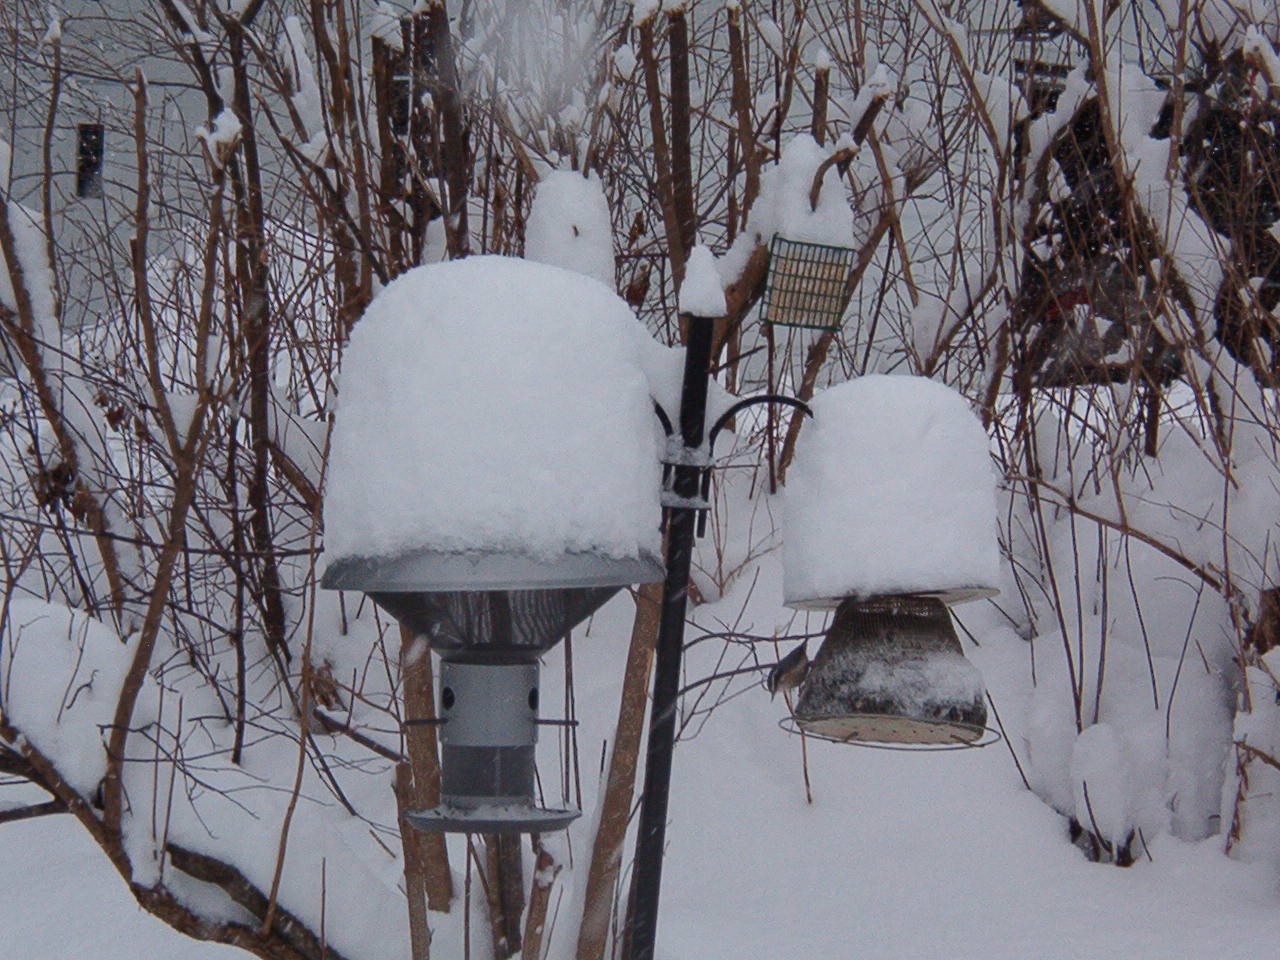 Bird Feeders In The Snow (user submitted)